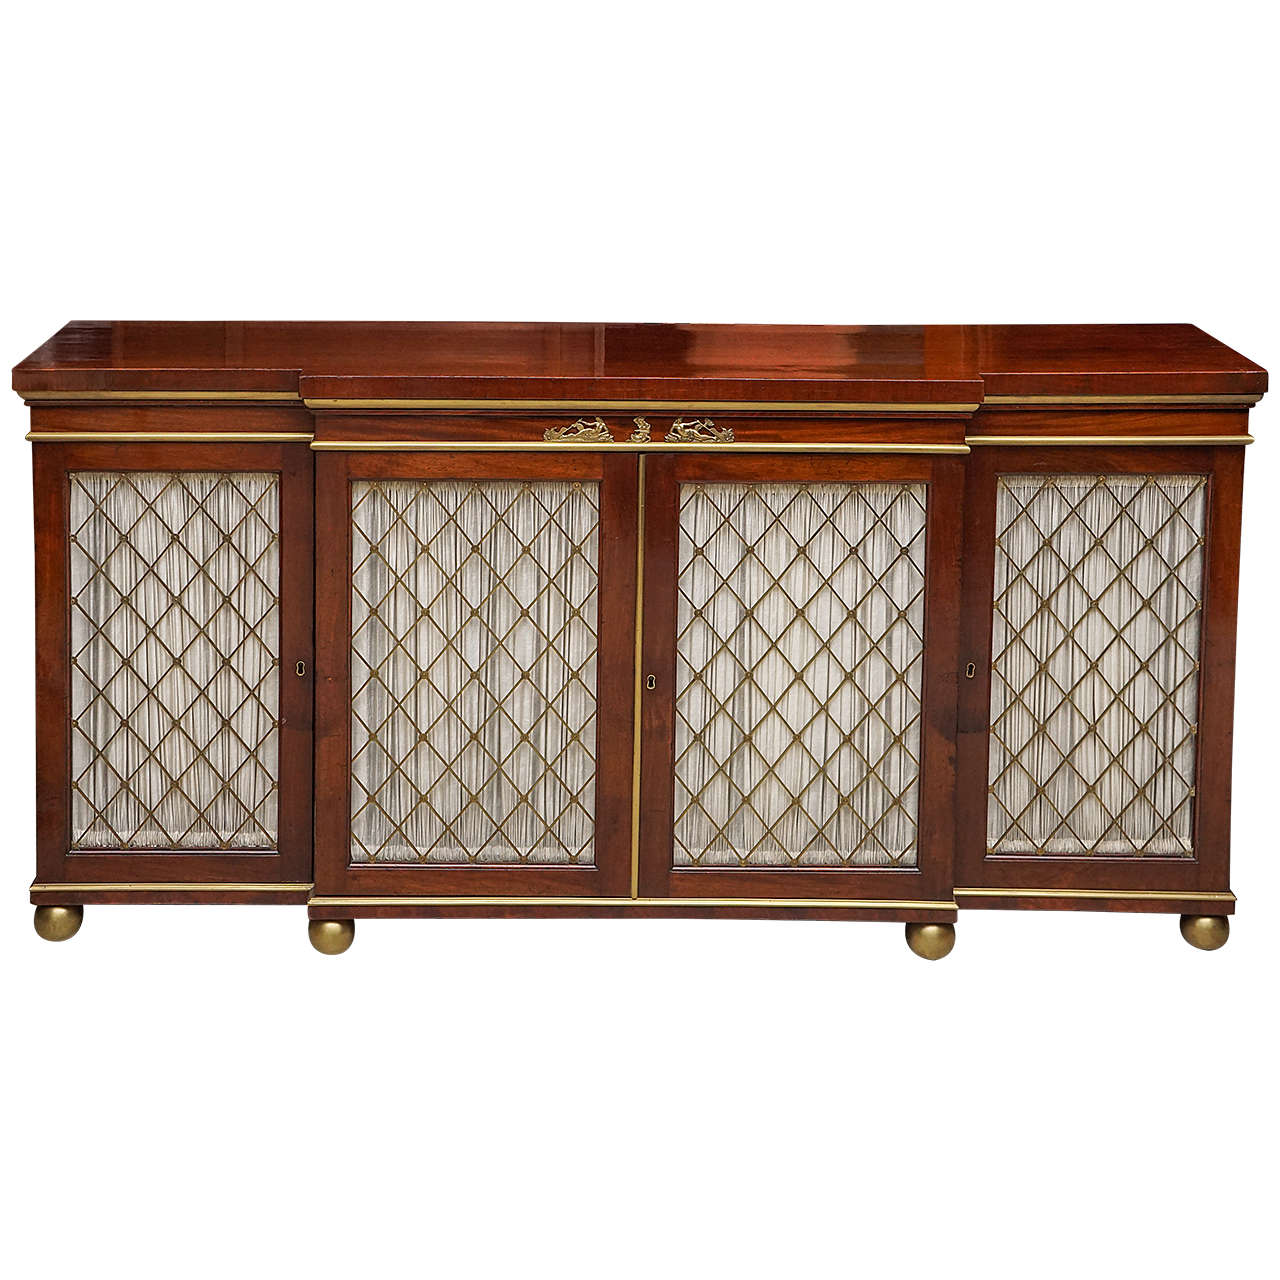 Period Regency Mahogany and Brass Banded Cabinet